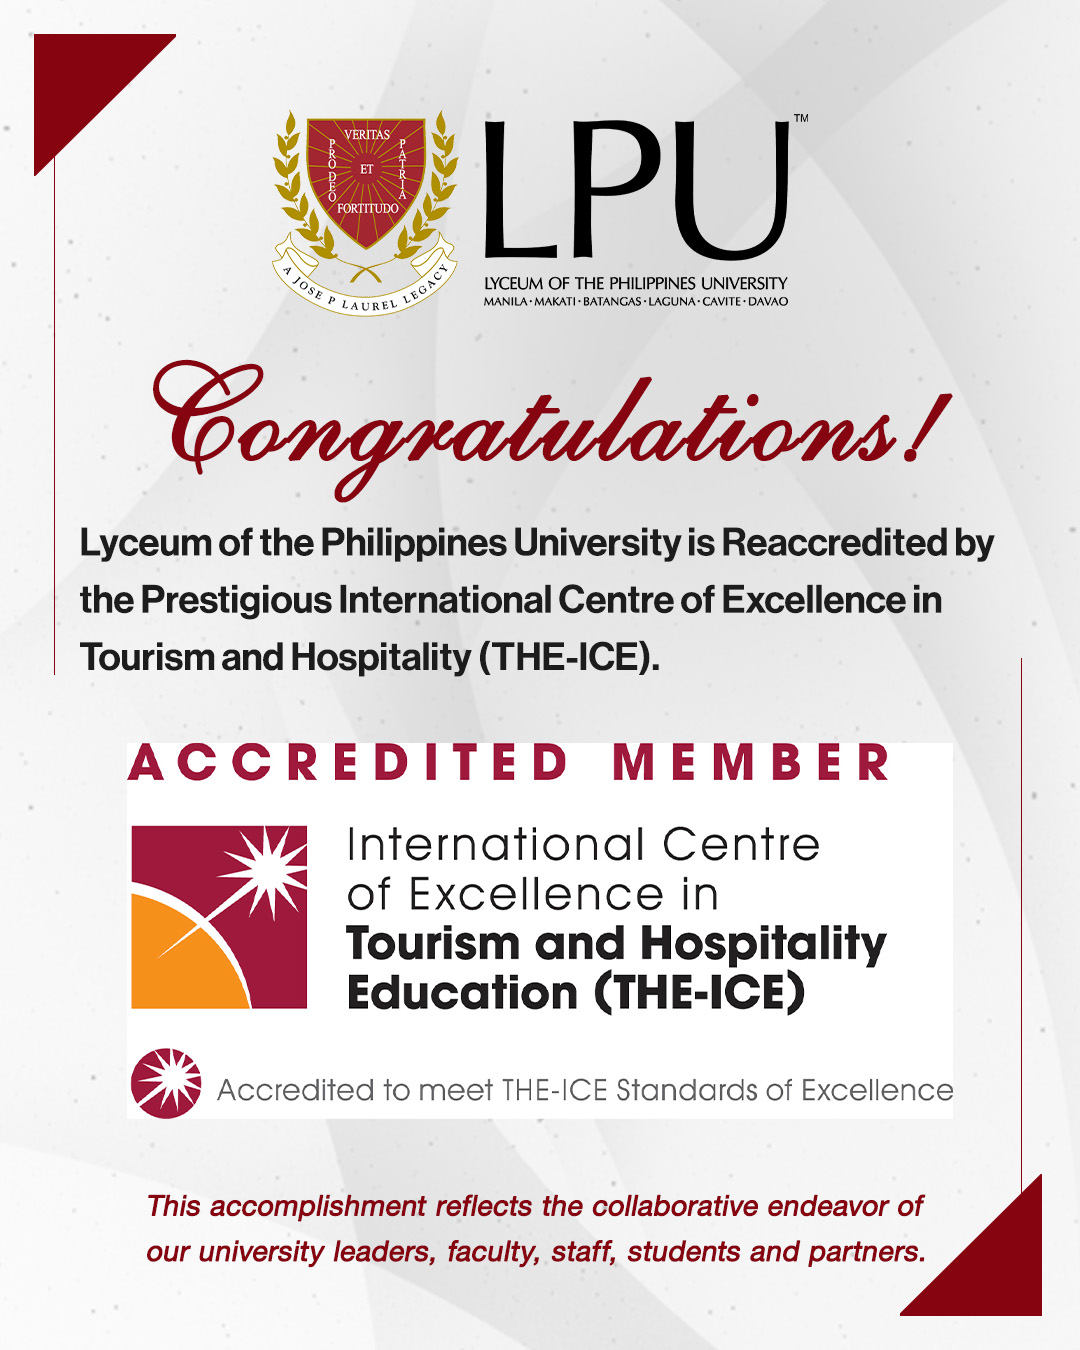 International Centre of Excellence in Tourism and Hospitality Education (THE-ICE) Reaccreditation